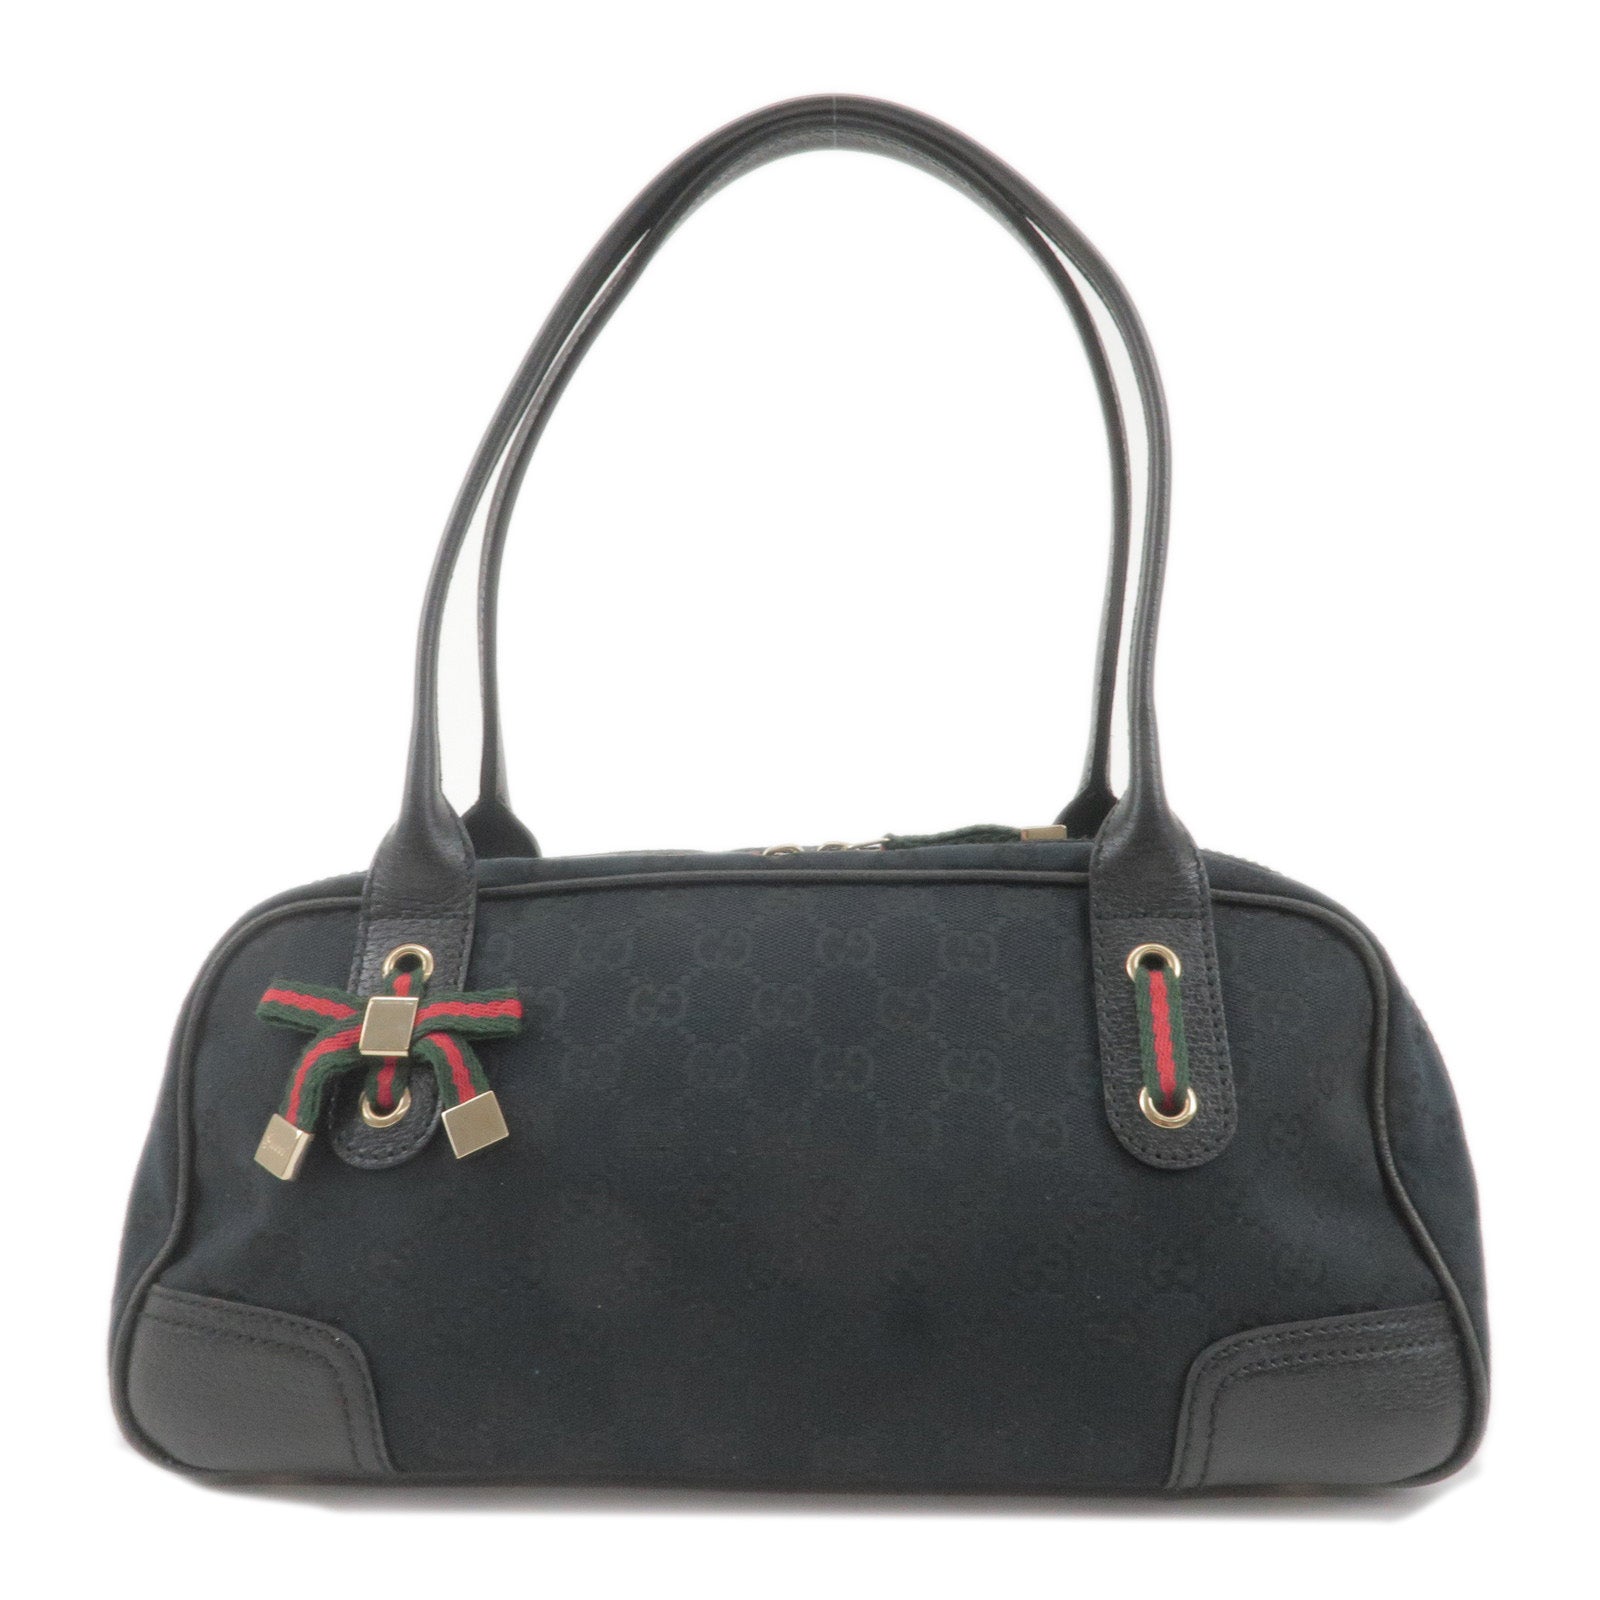 GUCCI-Sherry-Princy-GG-Canvas-Leather-Hand-Bag-Black-161720